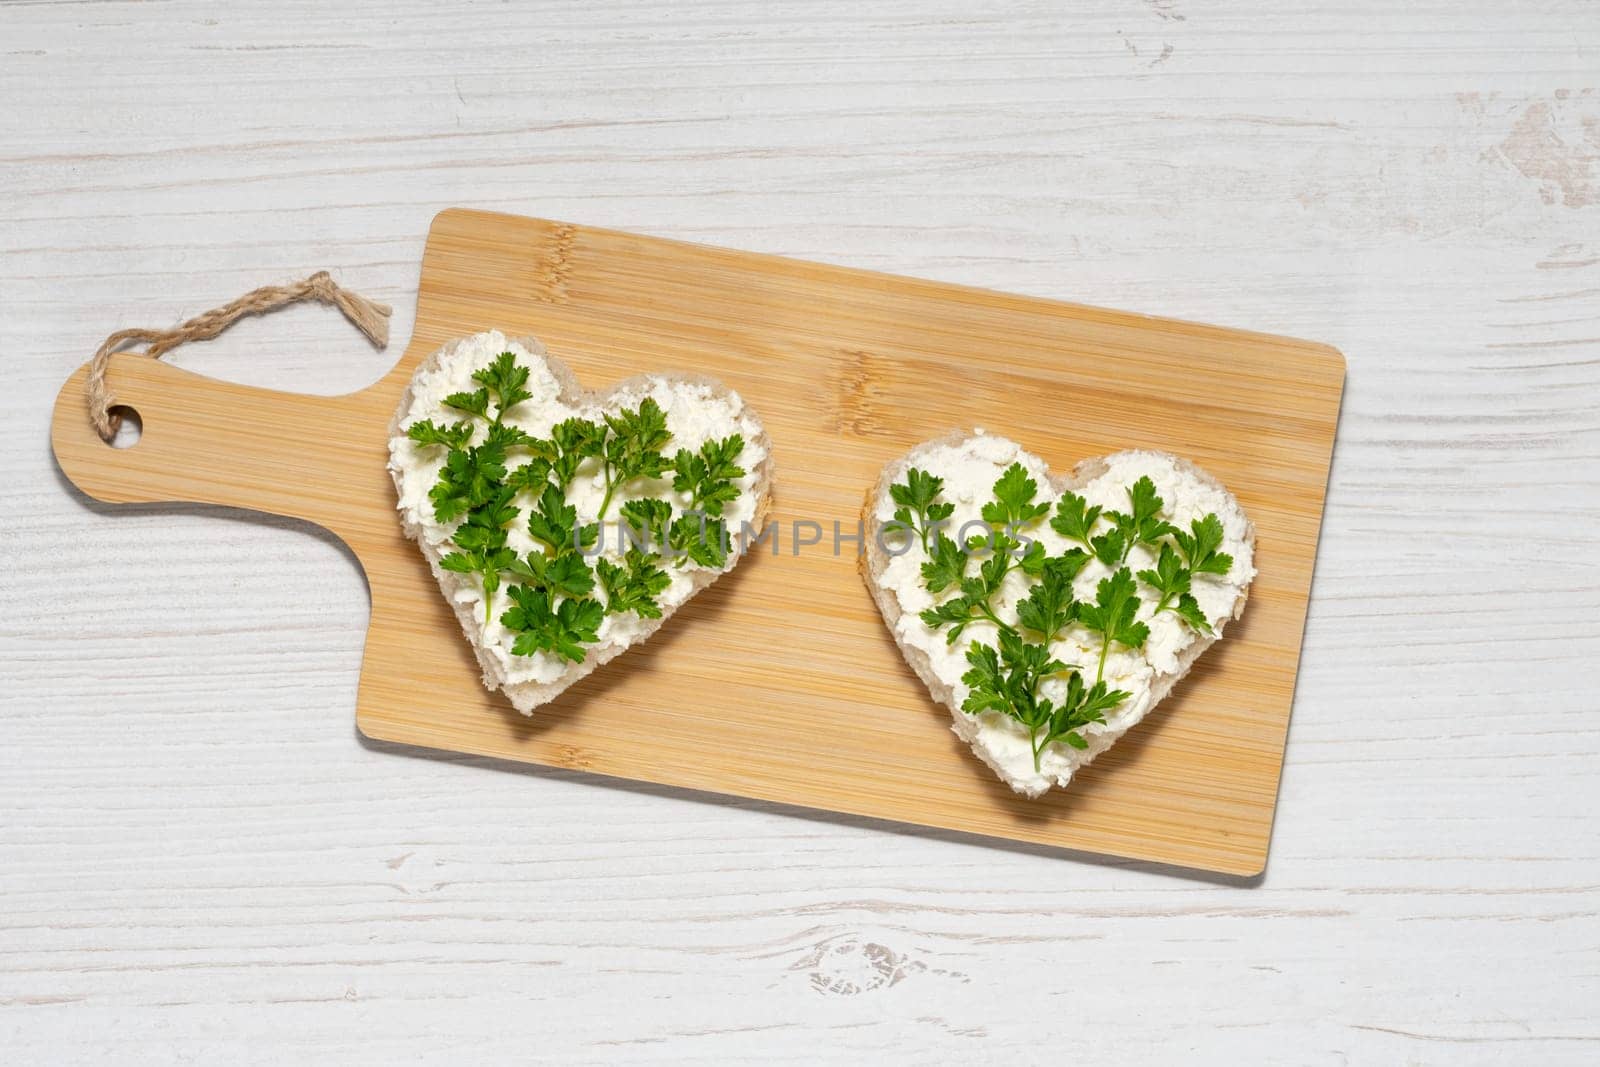 Two heart-shaped sandwiches with cottage cheese and parsley.